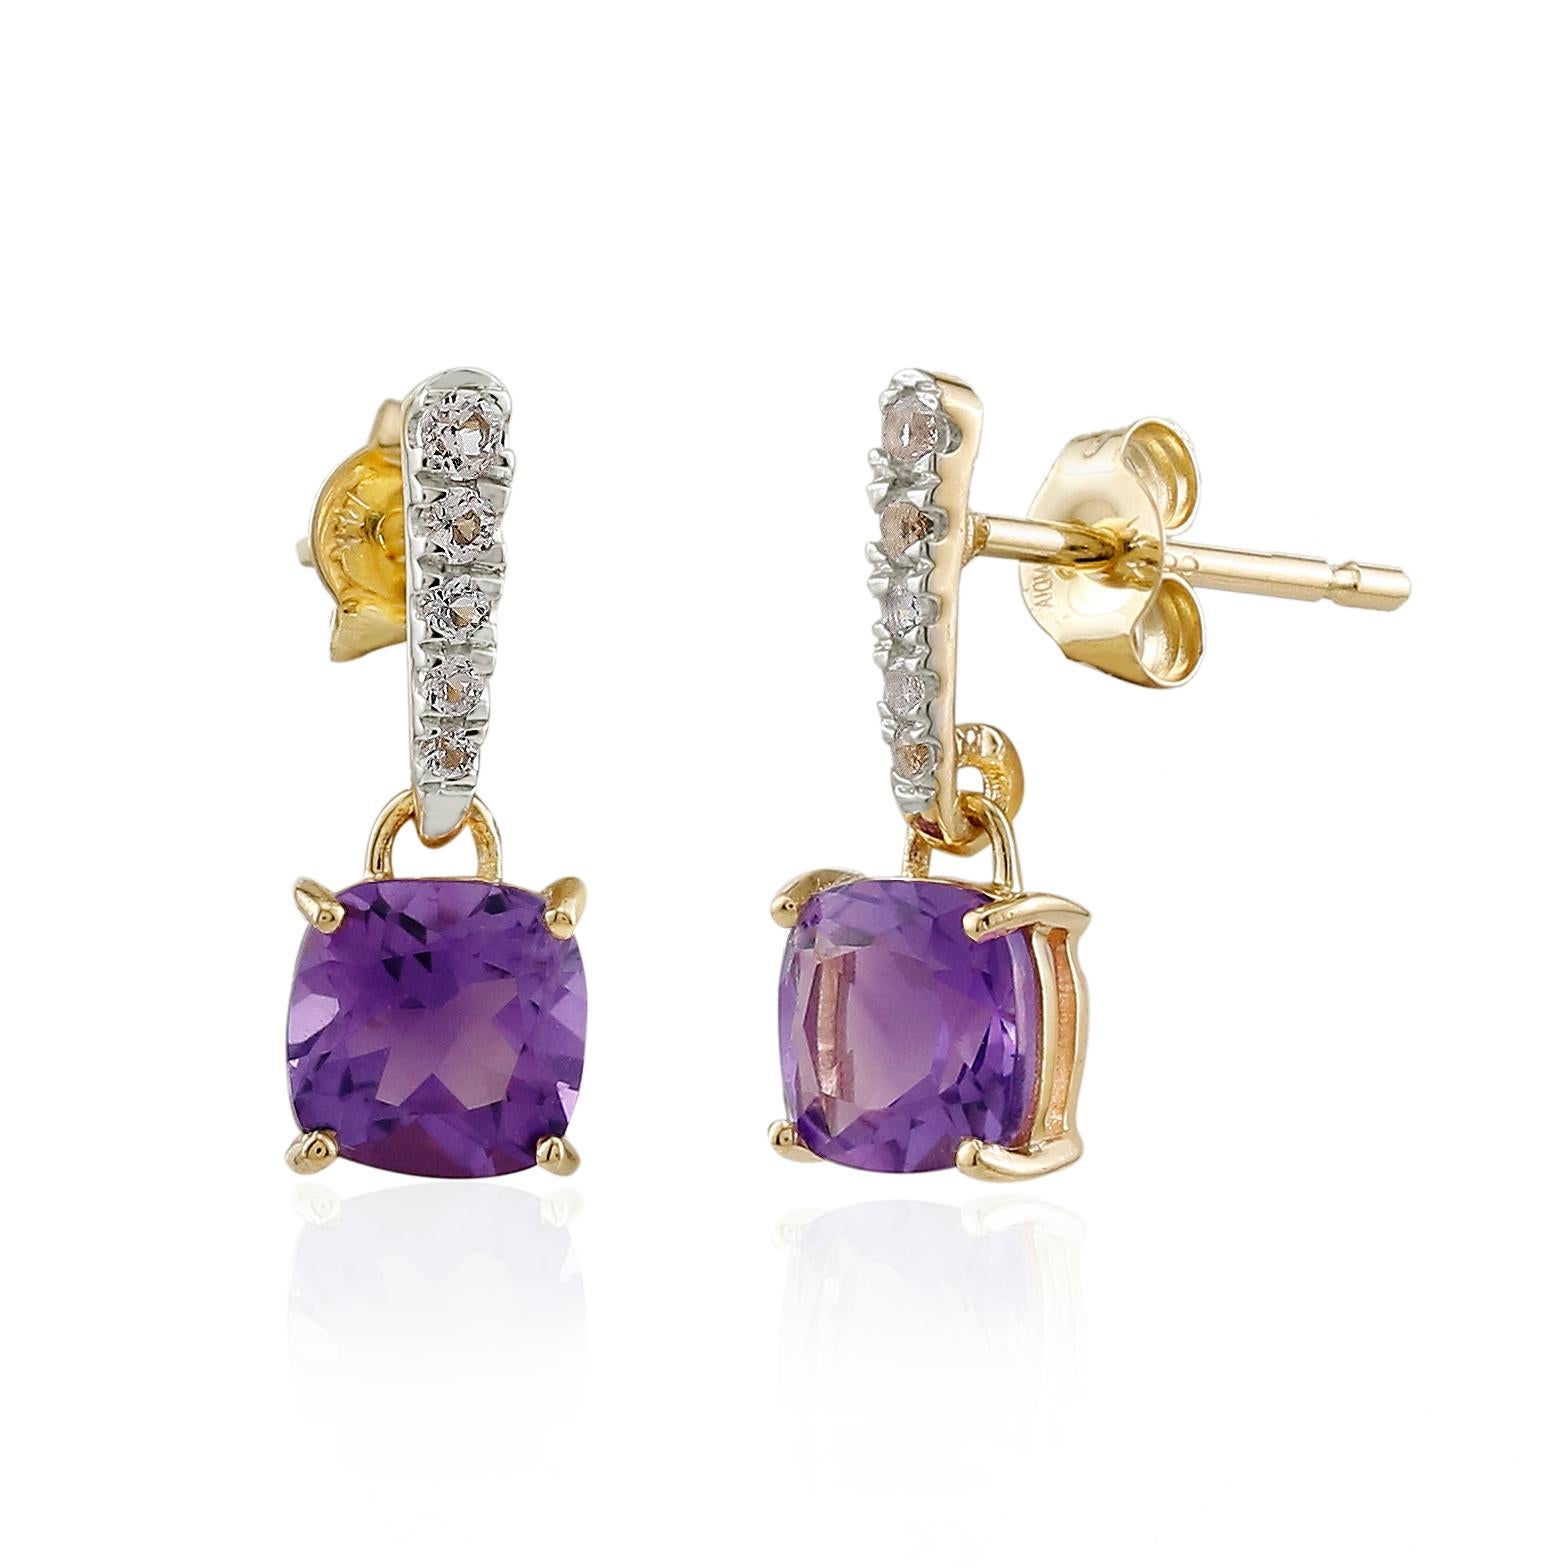 Add effortless elegance to any everyday look (or special occasion style) with these Gemistry gorgeous Amethyst drop earrings. This drop earring features 1.1 carat prong set , cushion cut Moroccan Amethyst which dangle from 14k gold bar studded with